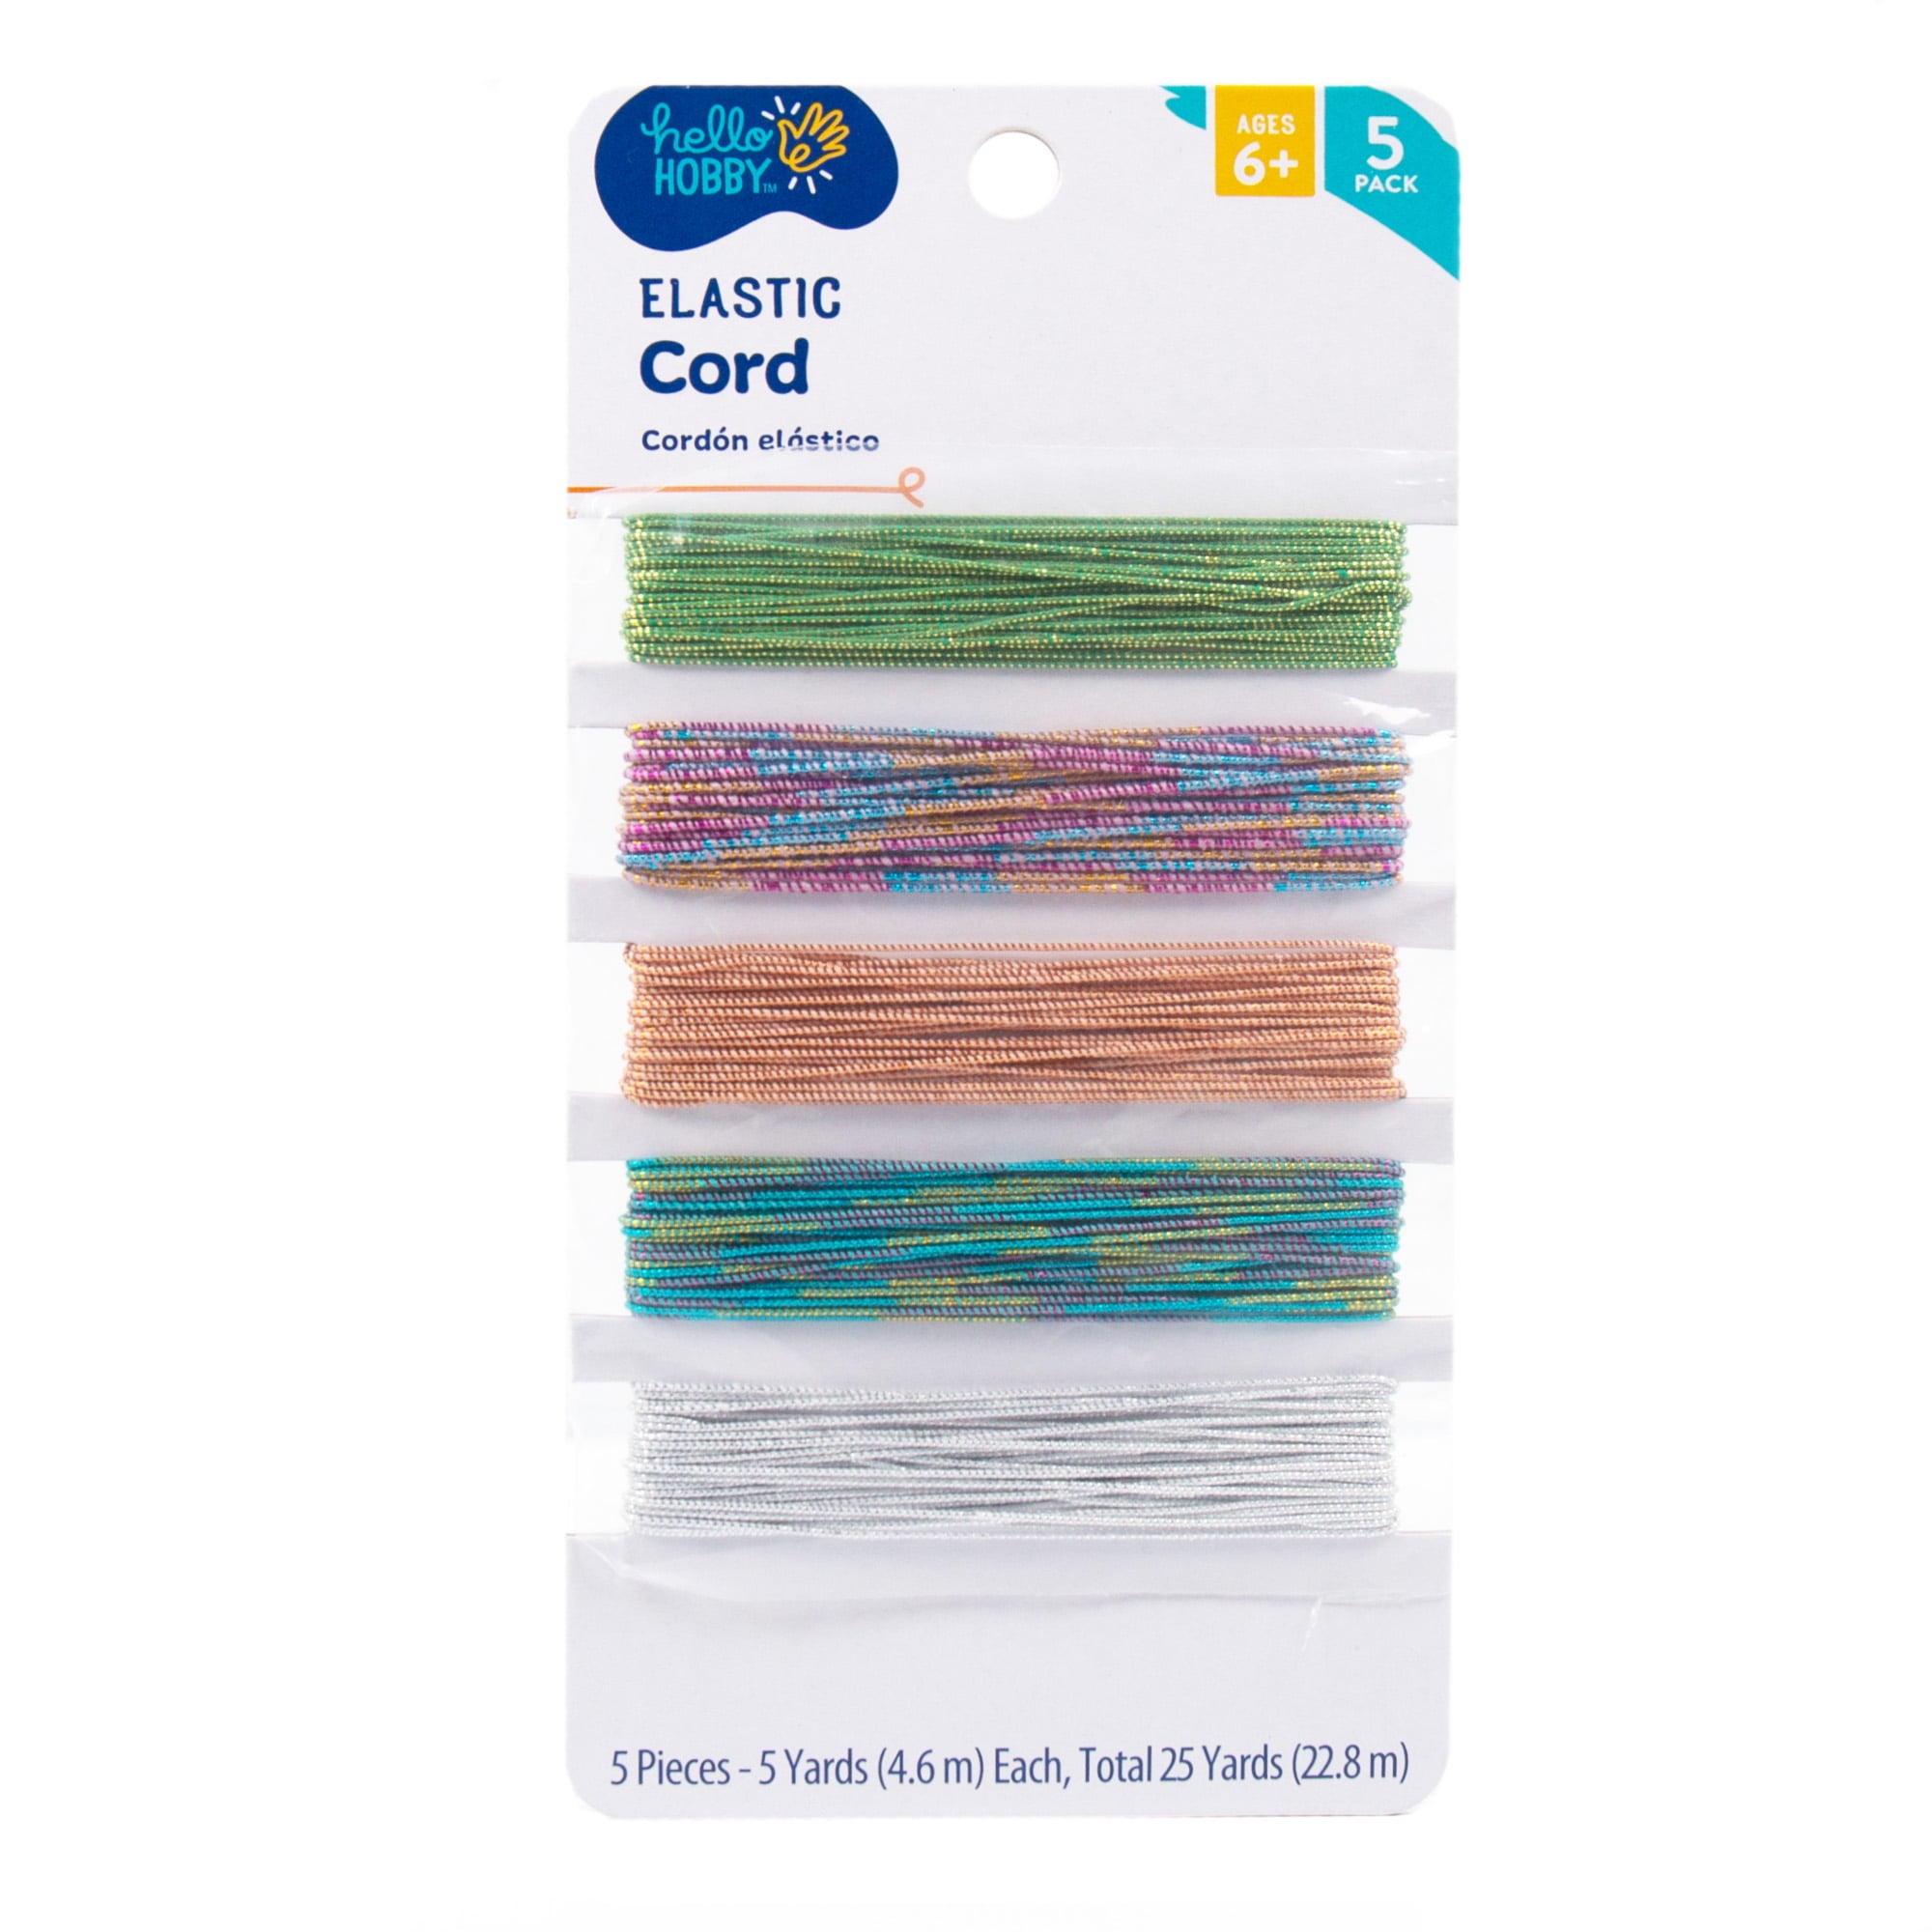 Elasticity Cord Kit with Appx 100M Cord in 4 Colors, Bead Stringing Glue,  and Elastic Cord Needle